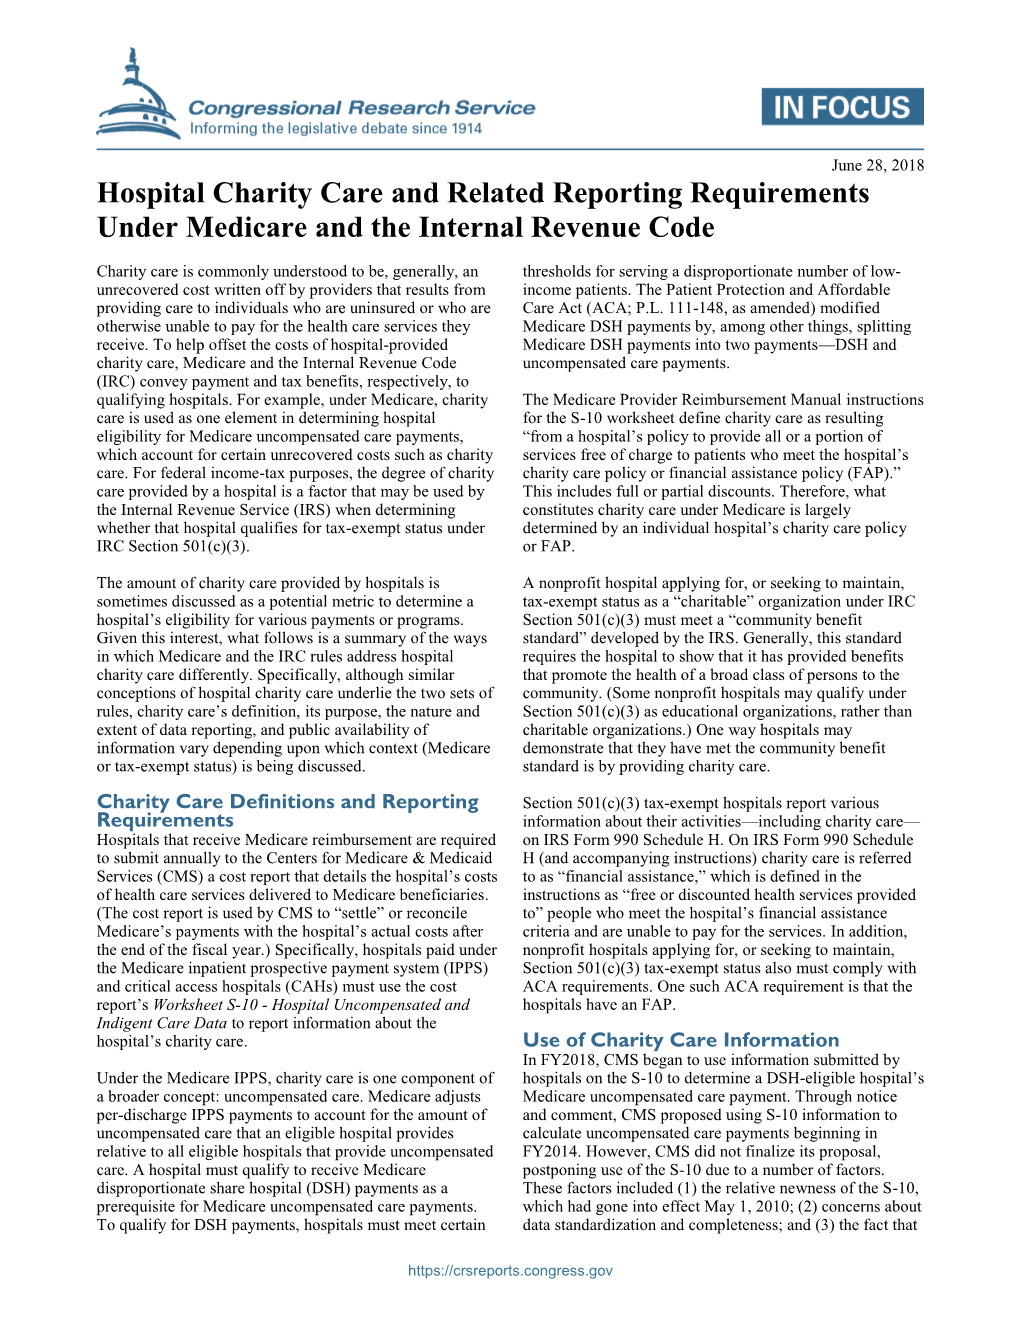 Hospital Charity Care and Related Reporting Requirements Under Medicare and the Internal Revenue Code